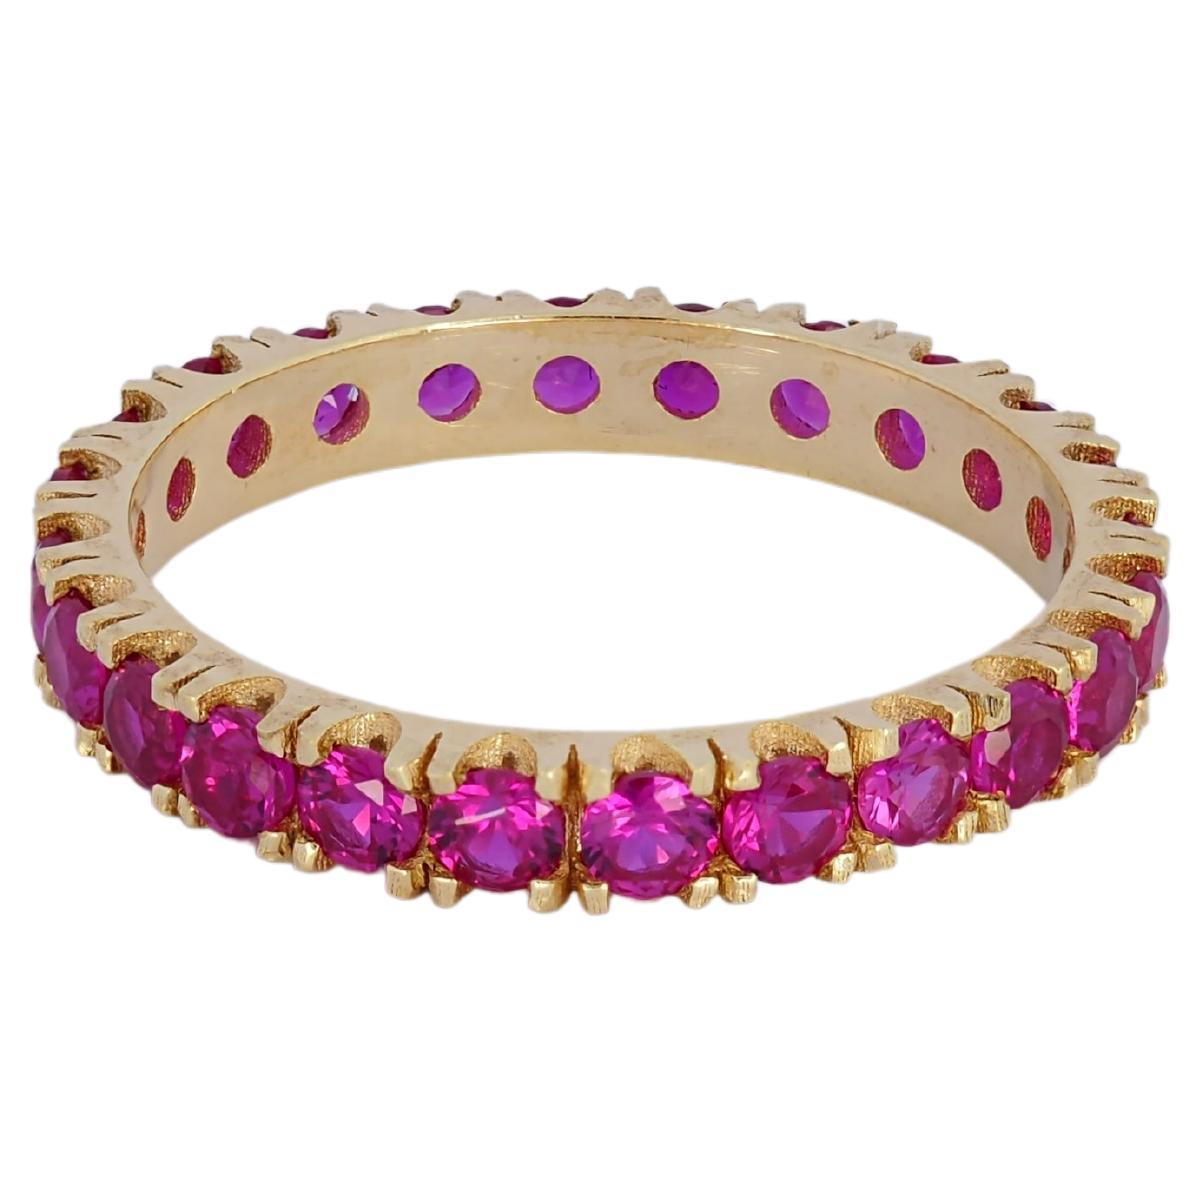 For Sale:  Pinkish red gemstone 14k gold eternity ring band.